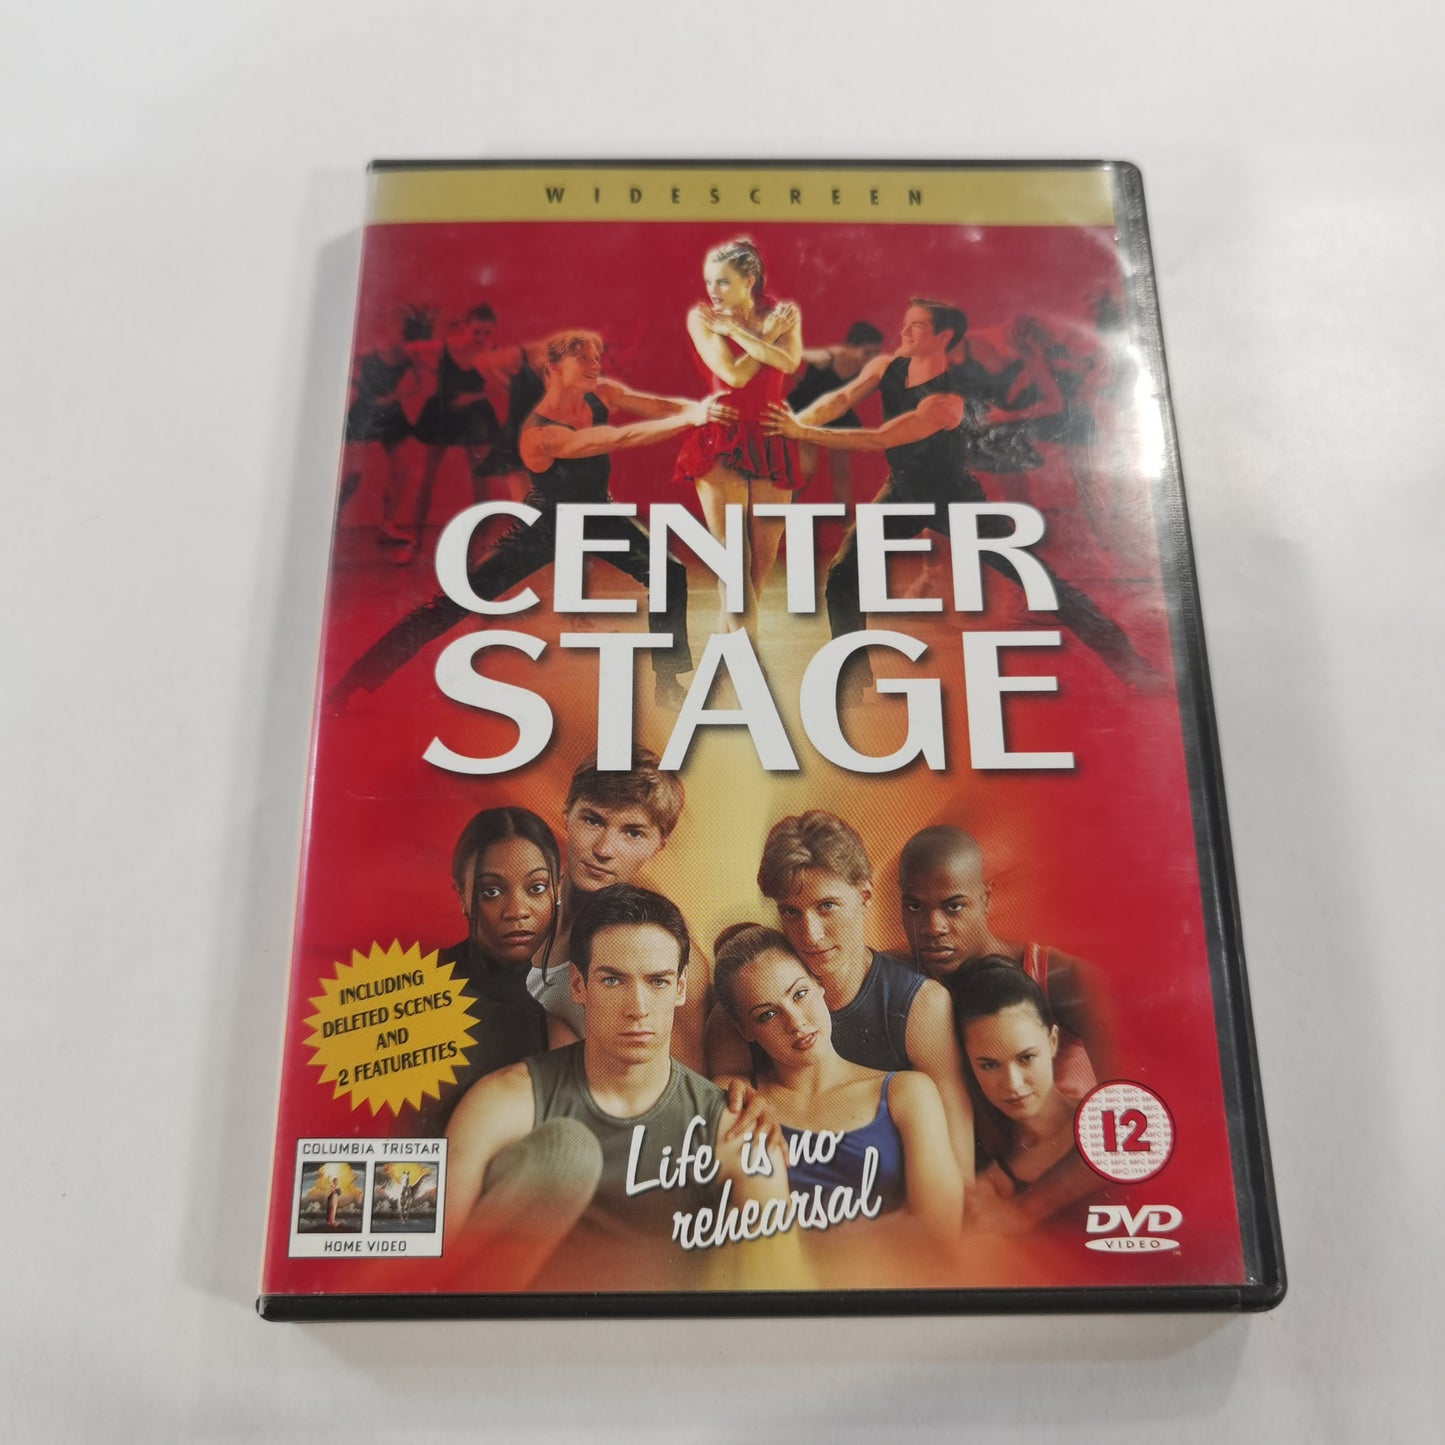 Center Stage (2000) - DVD UK 2000 Widescreen